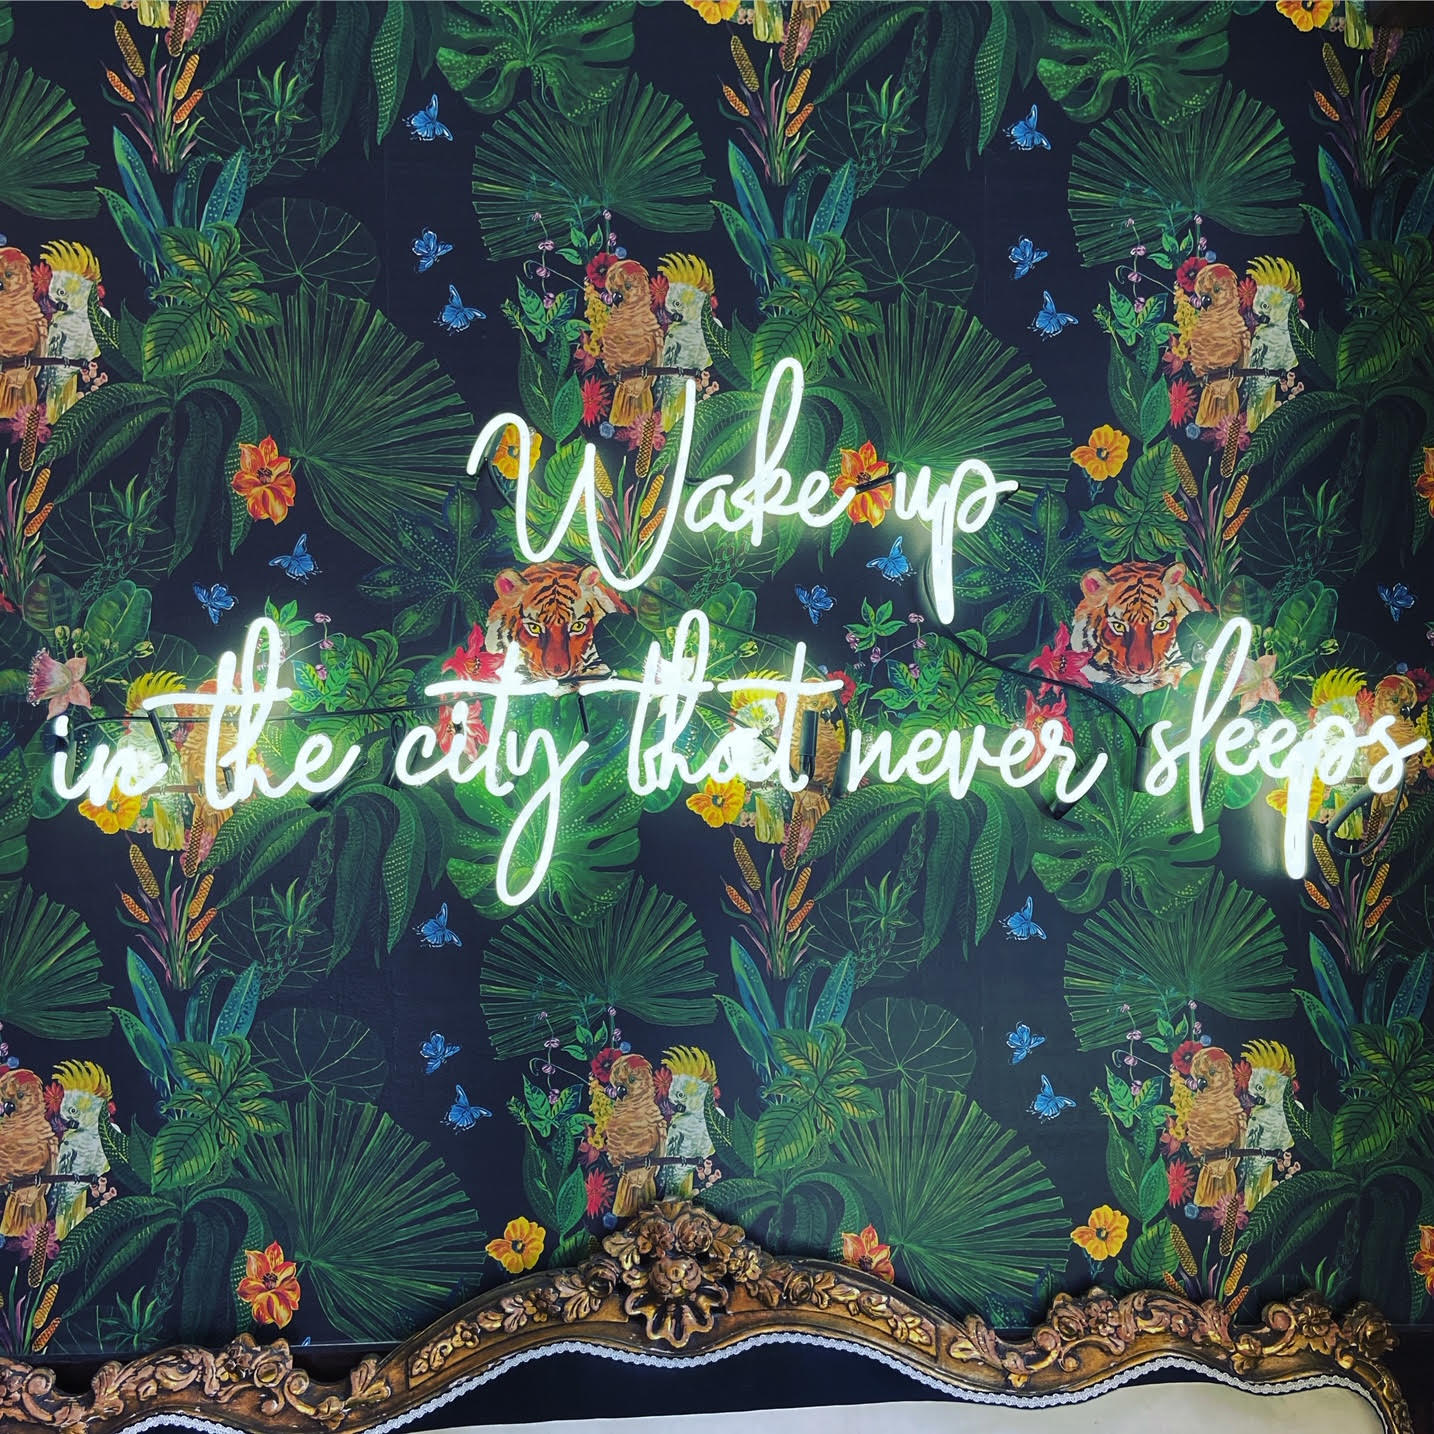 Wallpaper with LED lights that say "Wake up in the city that never sleeps"